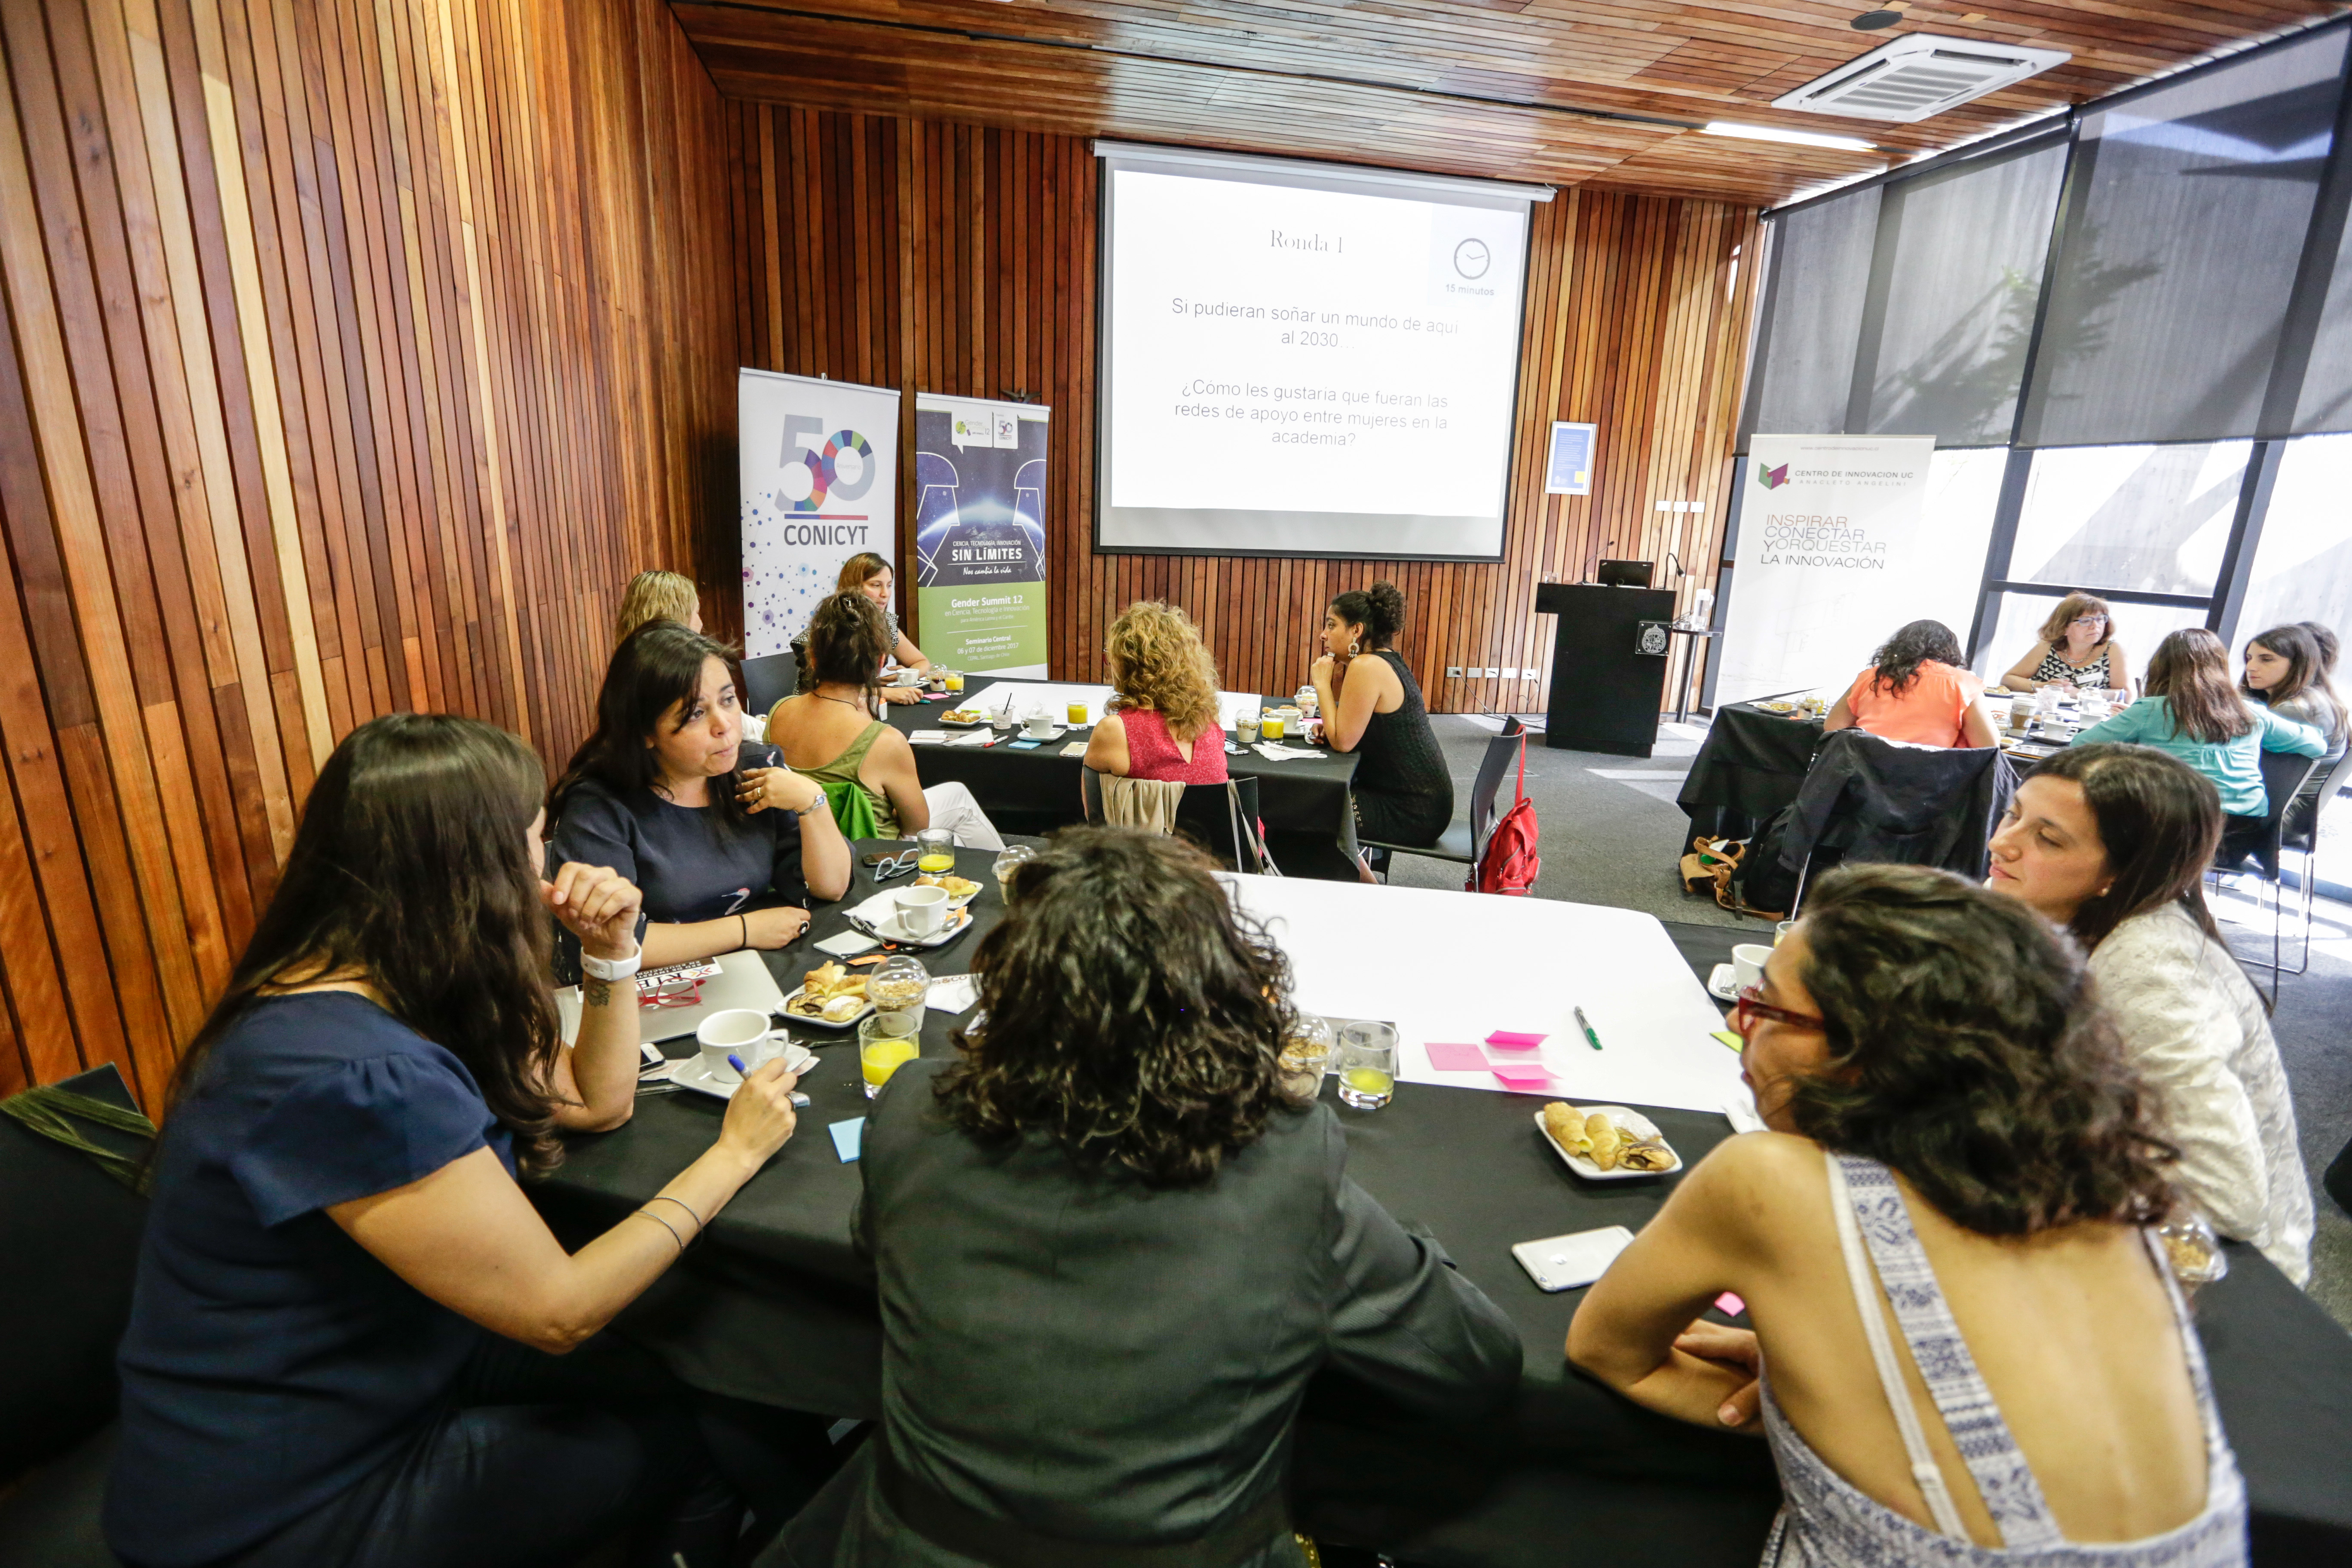 Women of the academy meet in dialogue about supporting networks